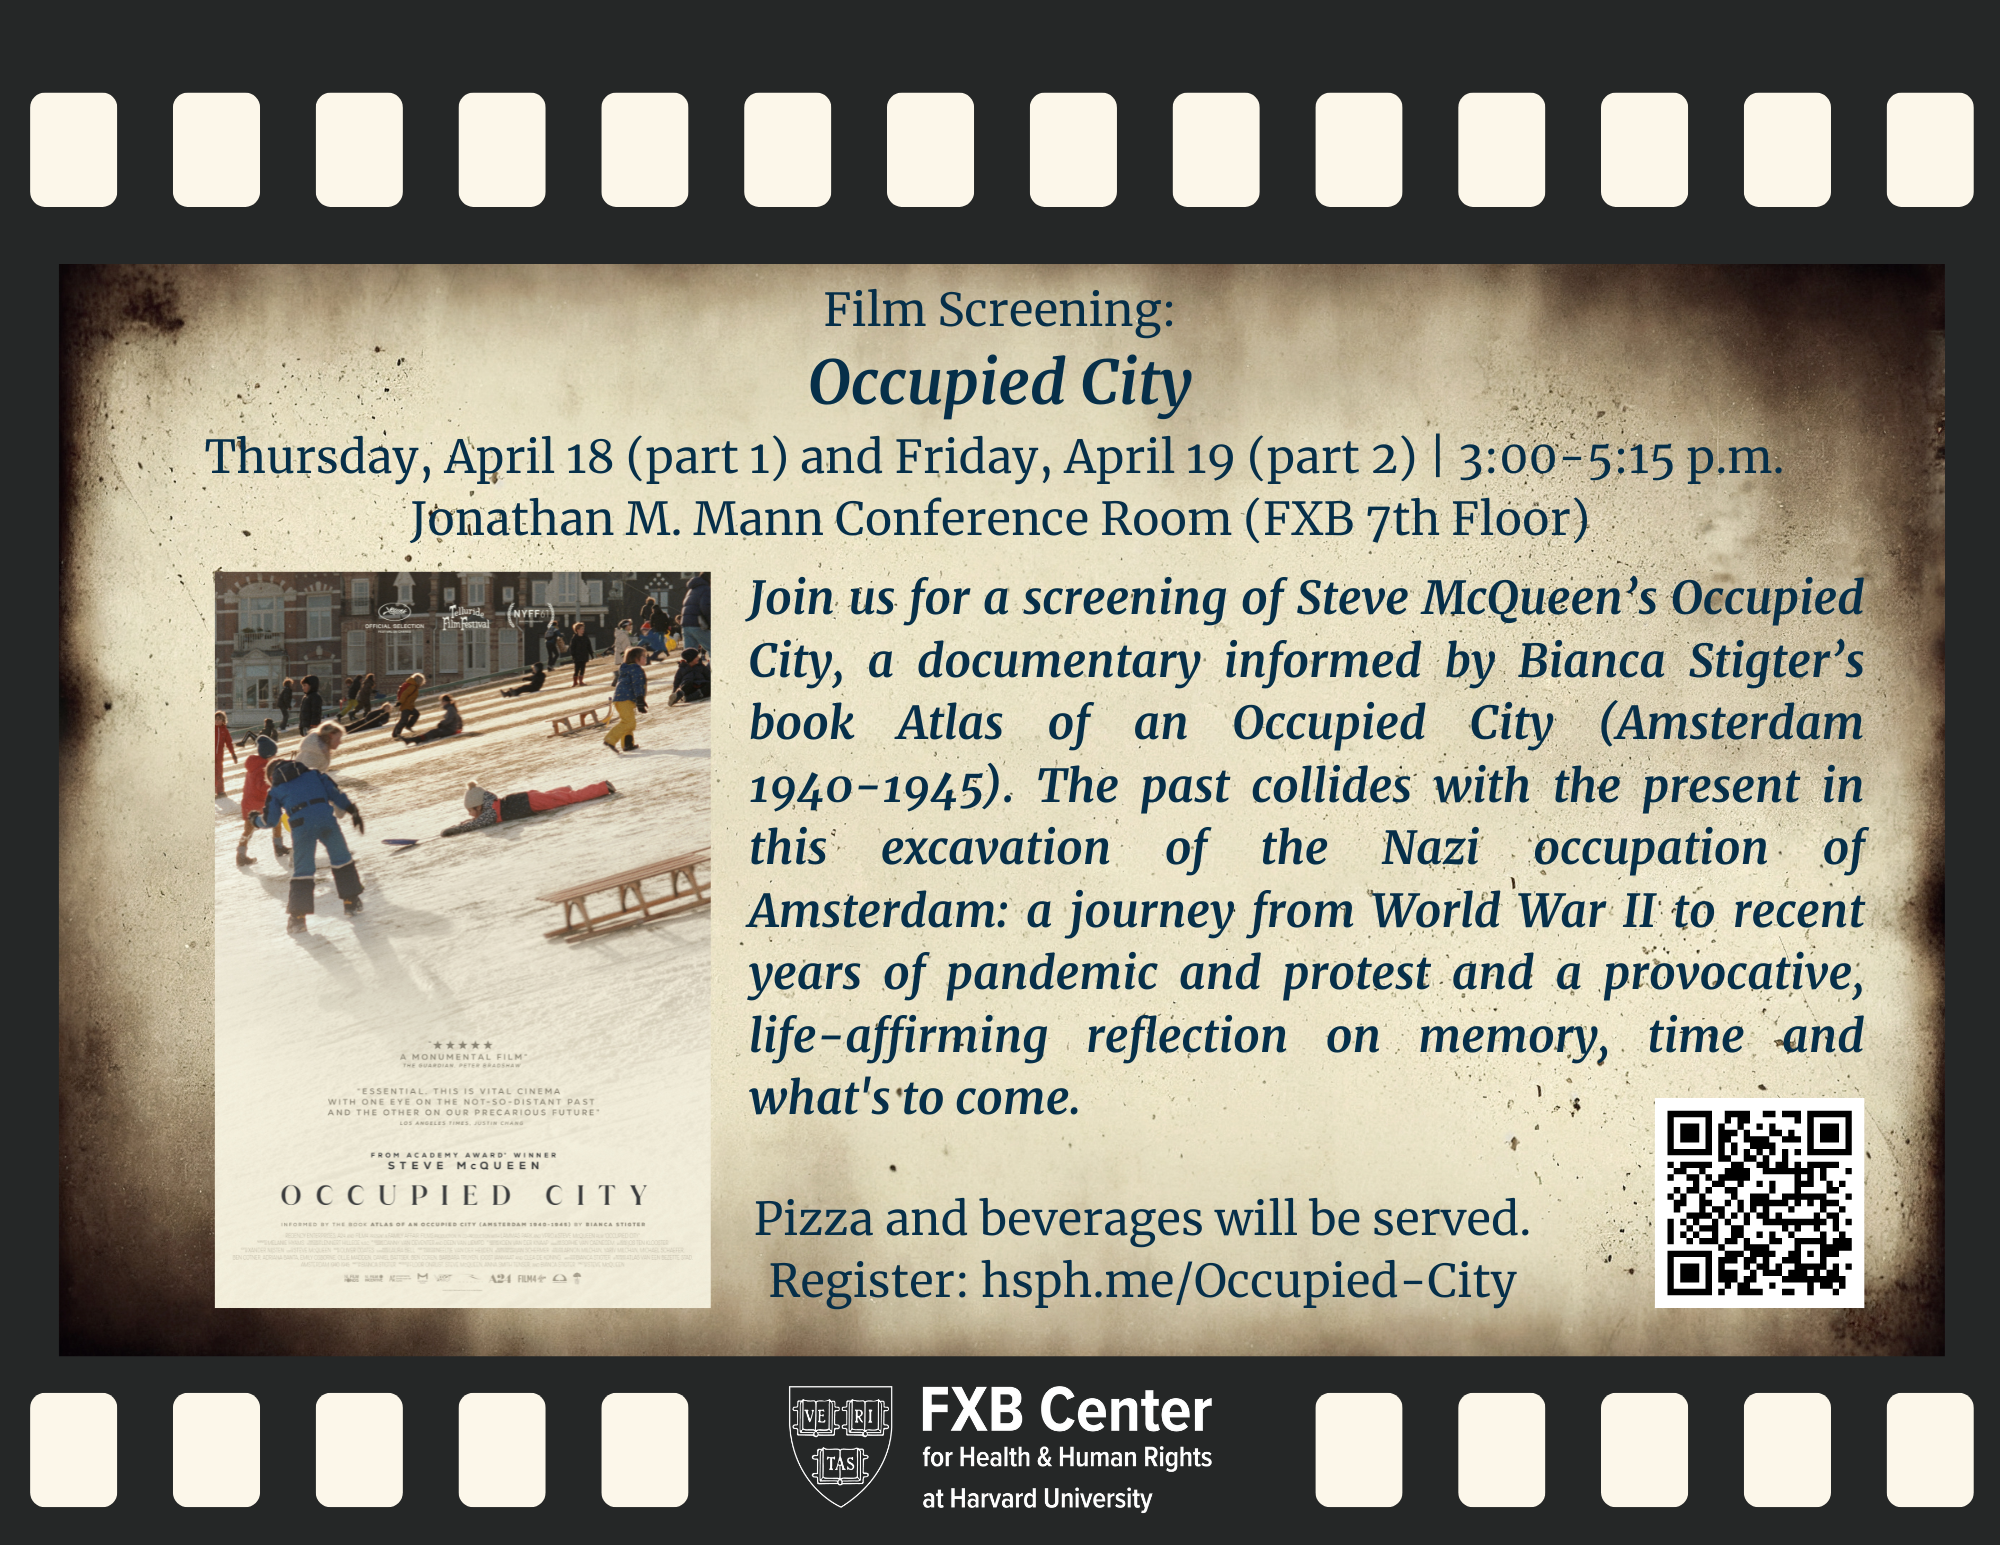 Background: film reel graphic. Film Screening: Occupied City. Thursday, April 18 (part 1) and Friday, April 19 (part 2) | 3:00-5:15 p.m. Jonathan M. Mann Conference Room (FXB 7th Floor). Join us for a screening of Steve McQueen’s Occupied City, a documentary informed by Bianca Stigter’s book Atlas of an Occupied City (Amsterdam 1940-1945). The past collides with the present in this excavation of the Nazi occupation of Amsterdam: a journey from World War II to recent years of pandemic and protest and a provocative, life-affirming reflection on memory, time and what's to come. Film flier. Pizza and beverages will be served. Register: hsph.me/Occupied-City. FXB Center logo.